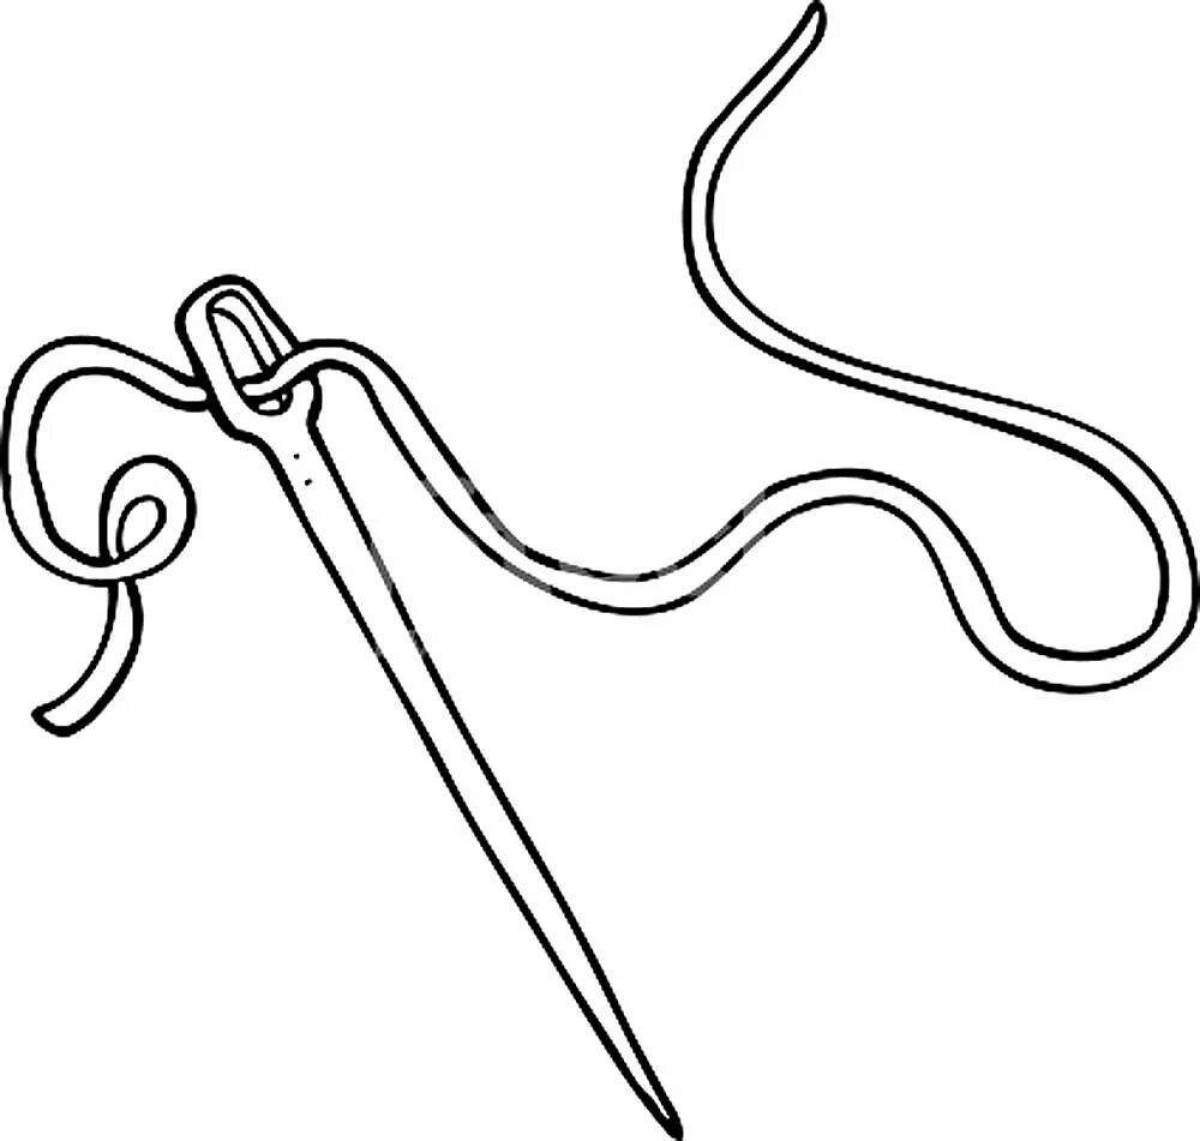 Colorful needle coloring page